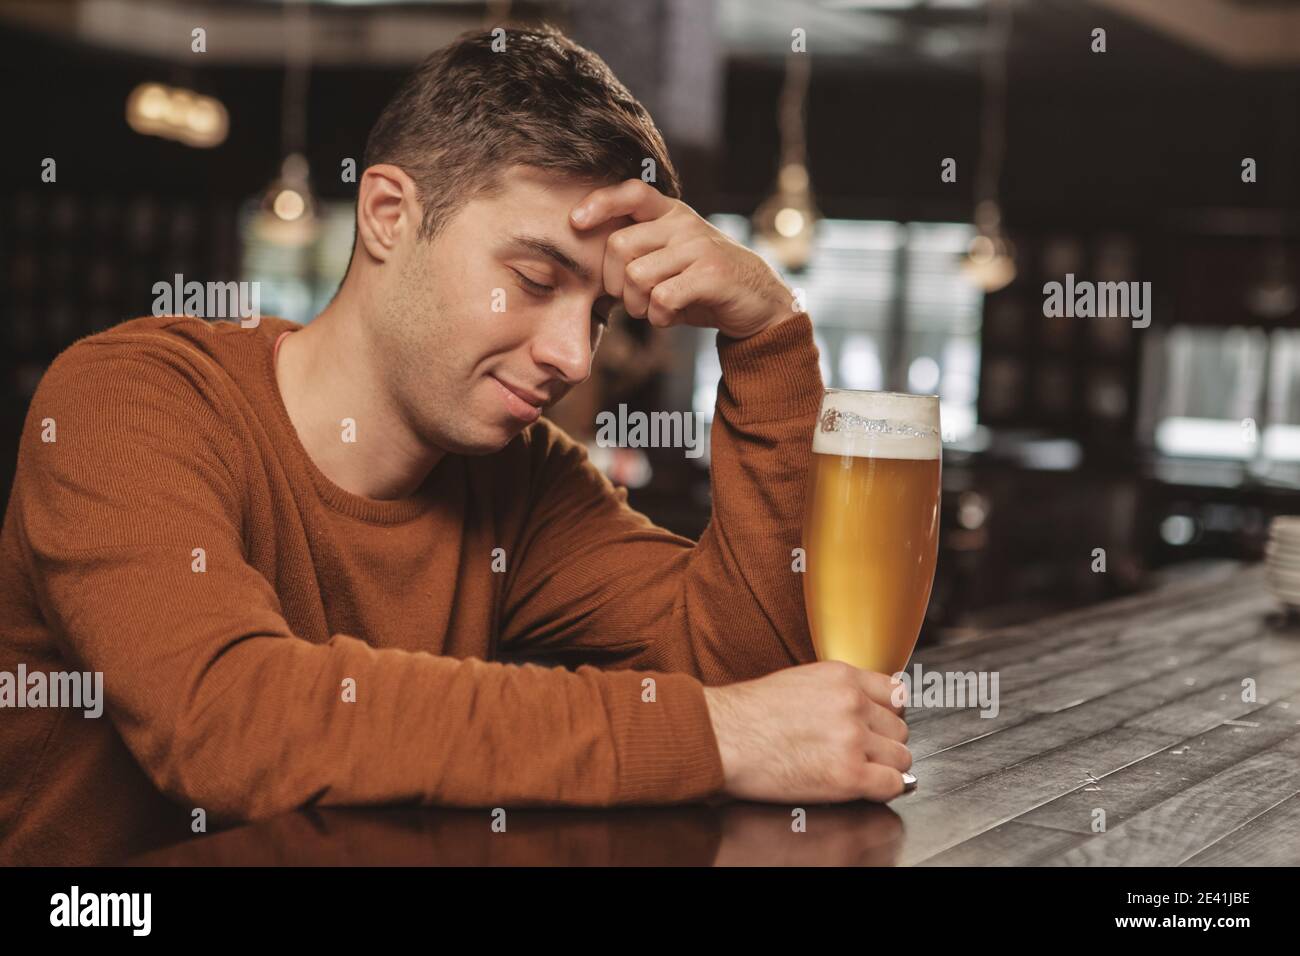 Young drunk man sleeping at the pub counter, smiling joyfully, holding full glass of delicious beer, copy space. Attractive tired man relaxing, drinki Stock Photo